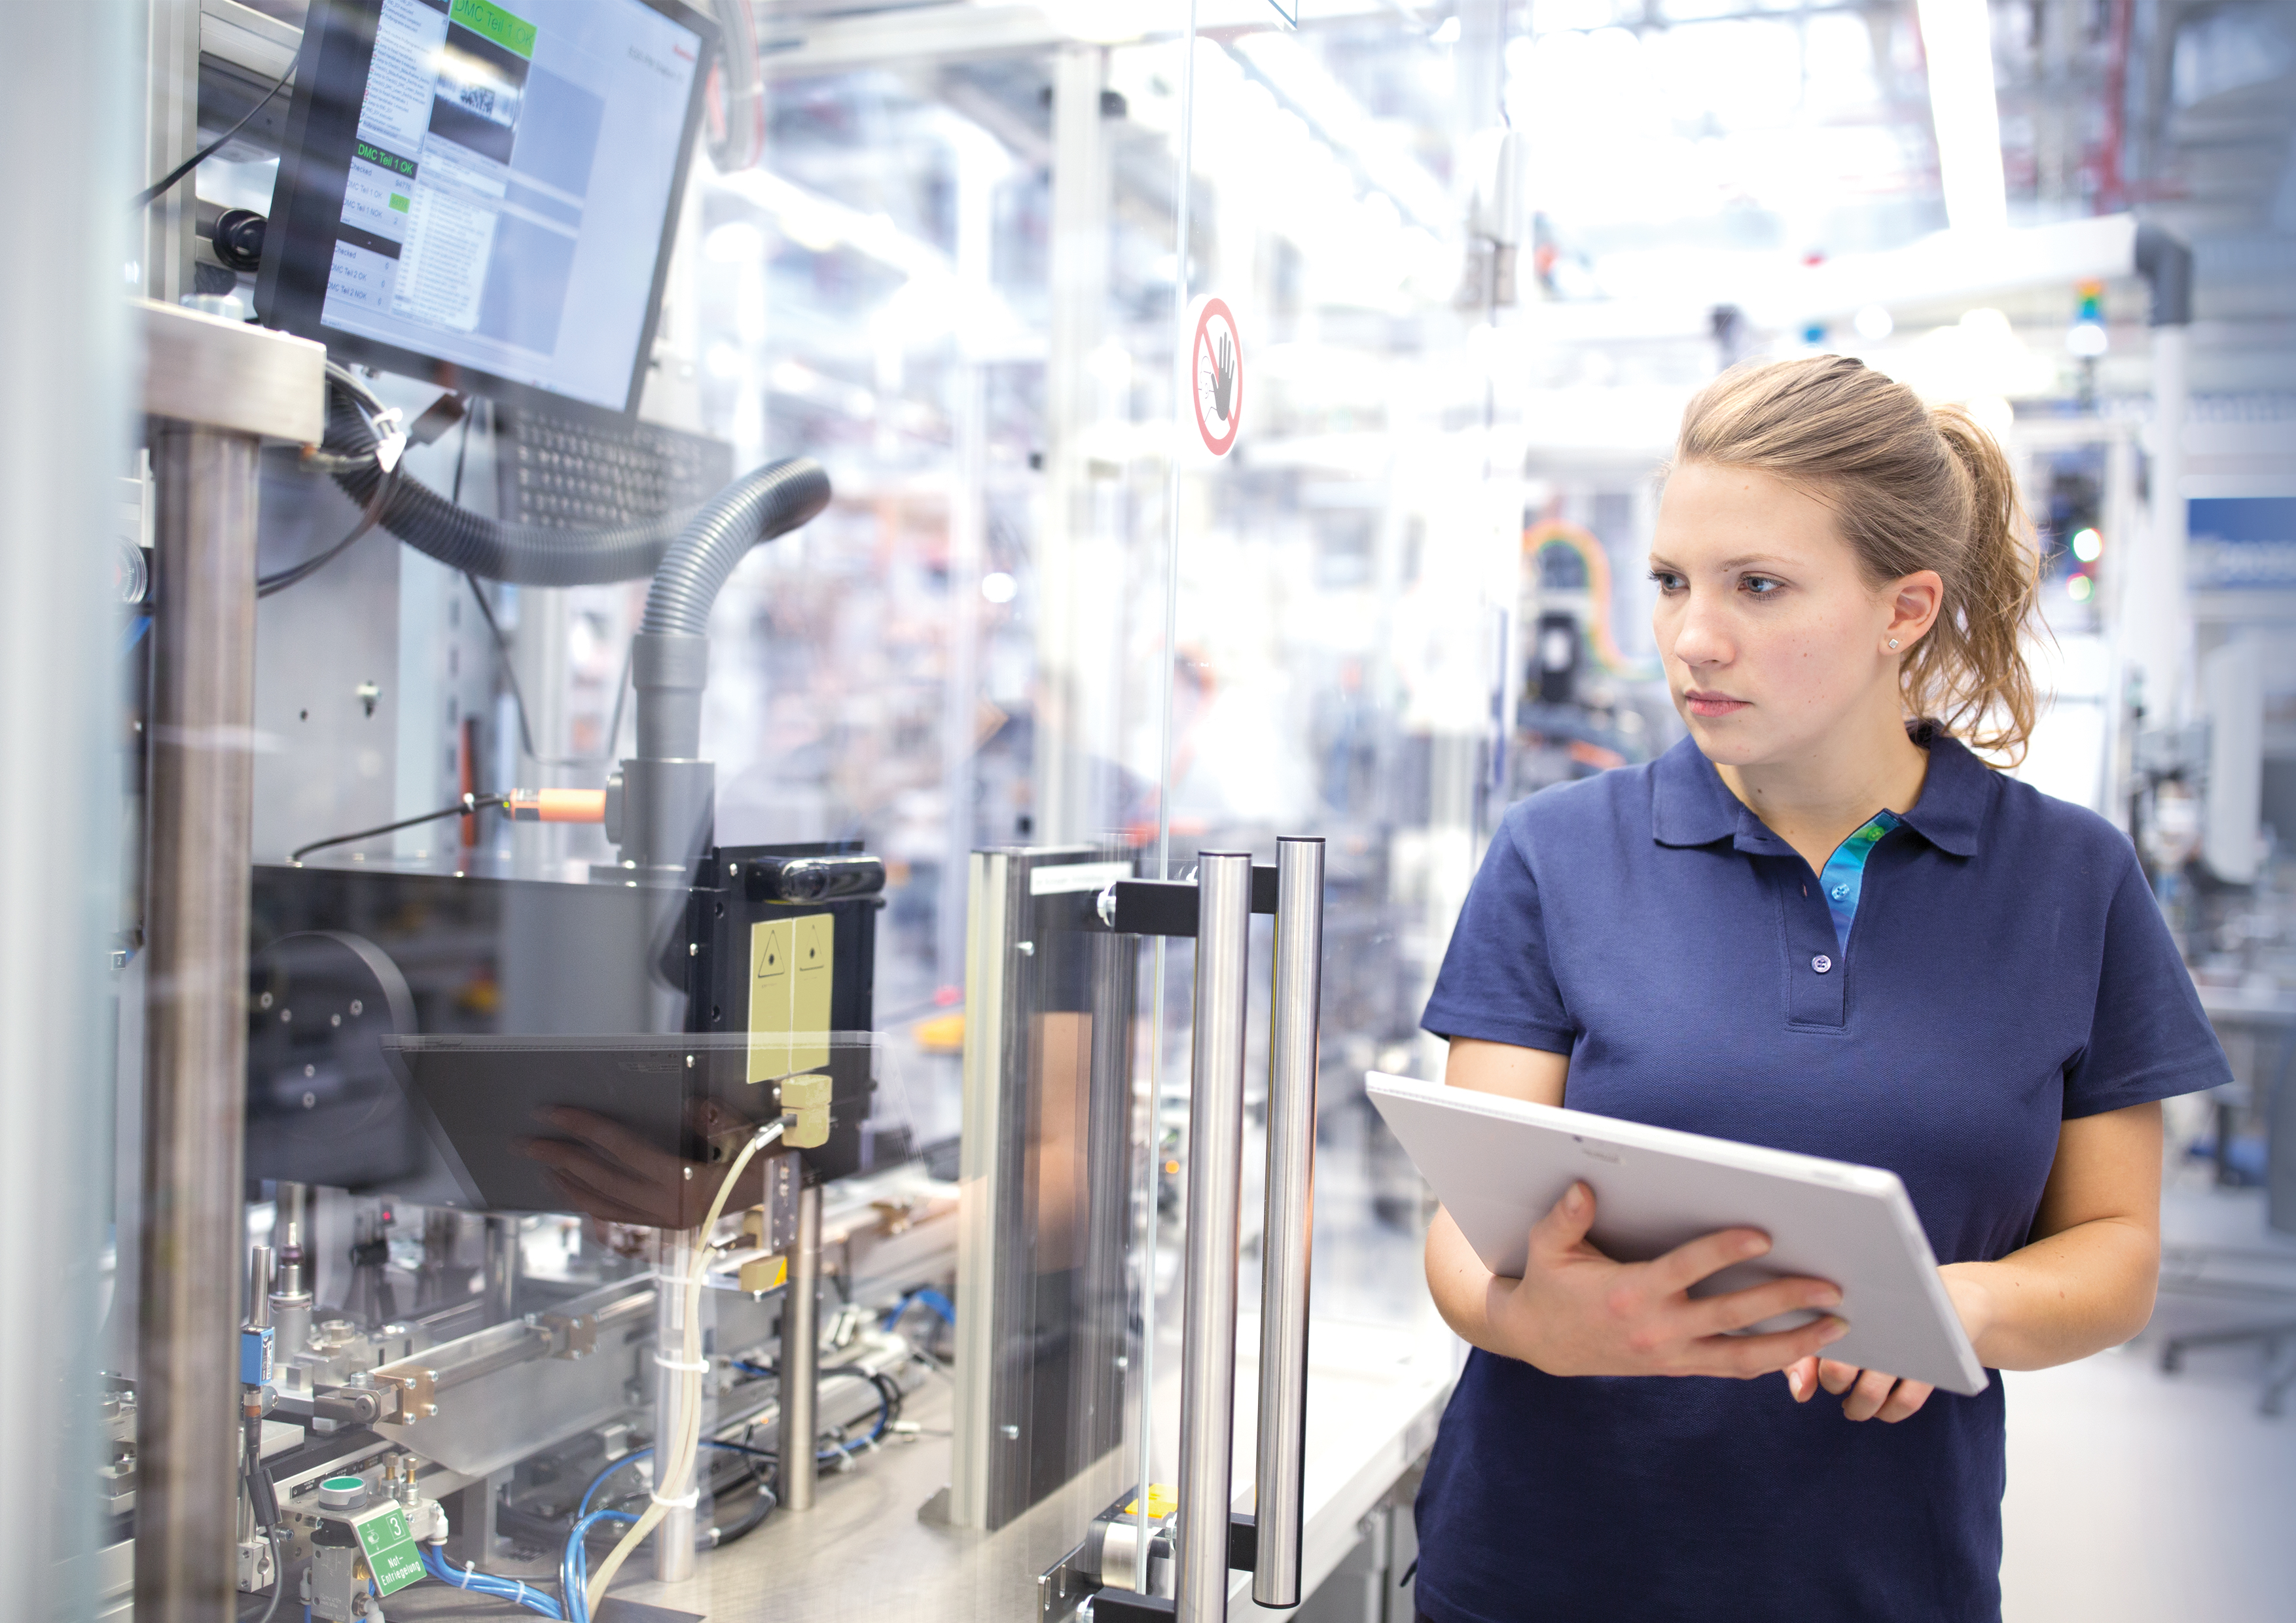 Industry 4.0: Bosch is a pioneer and leader